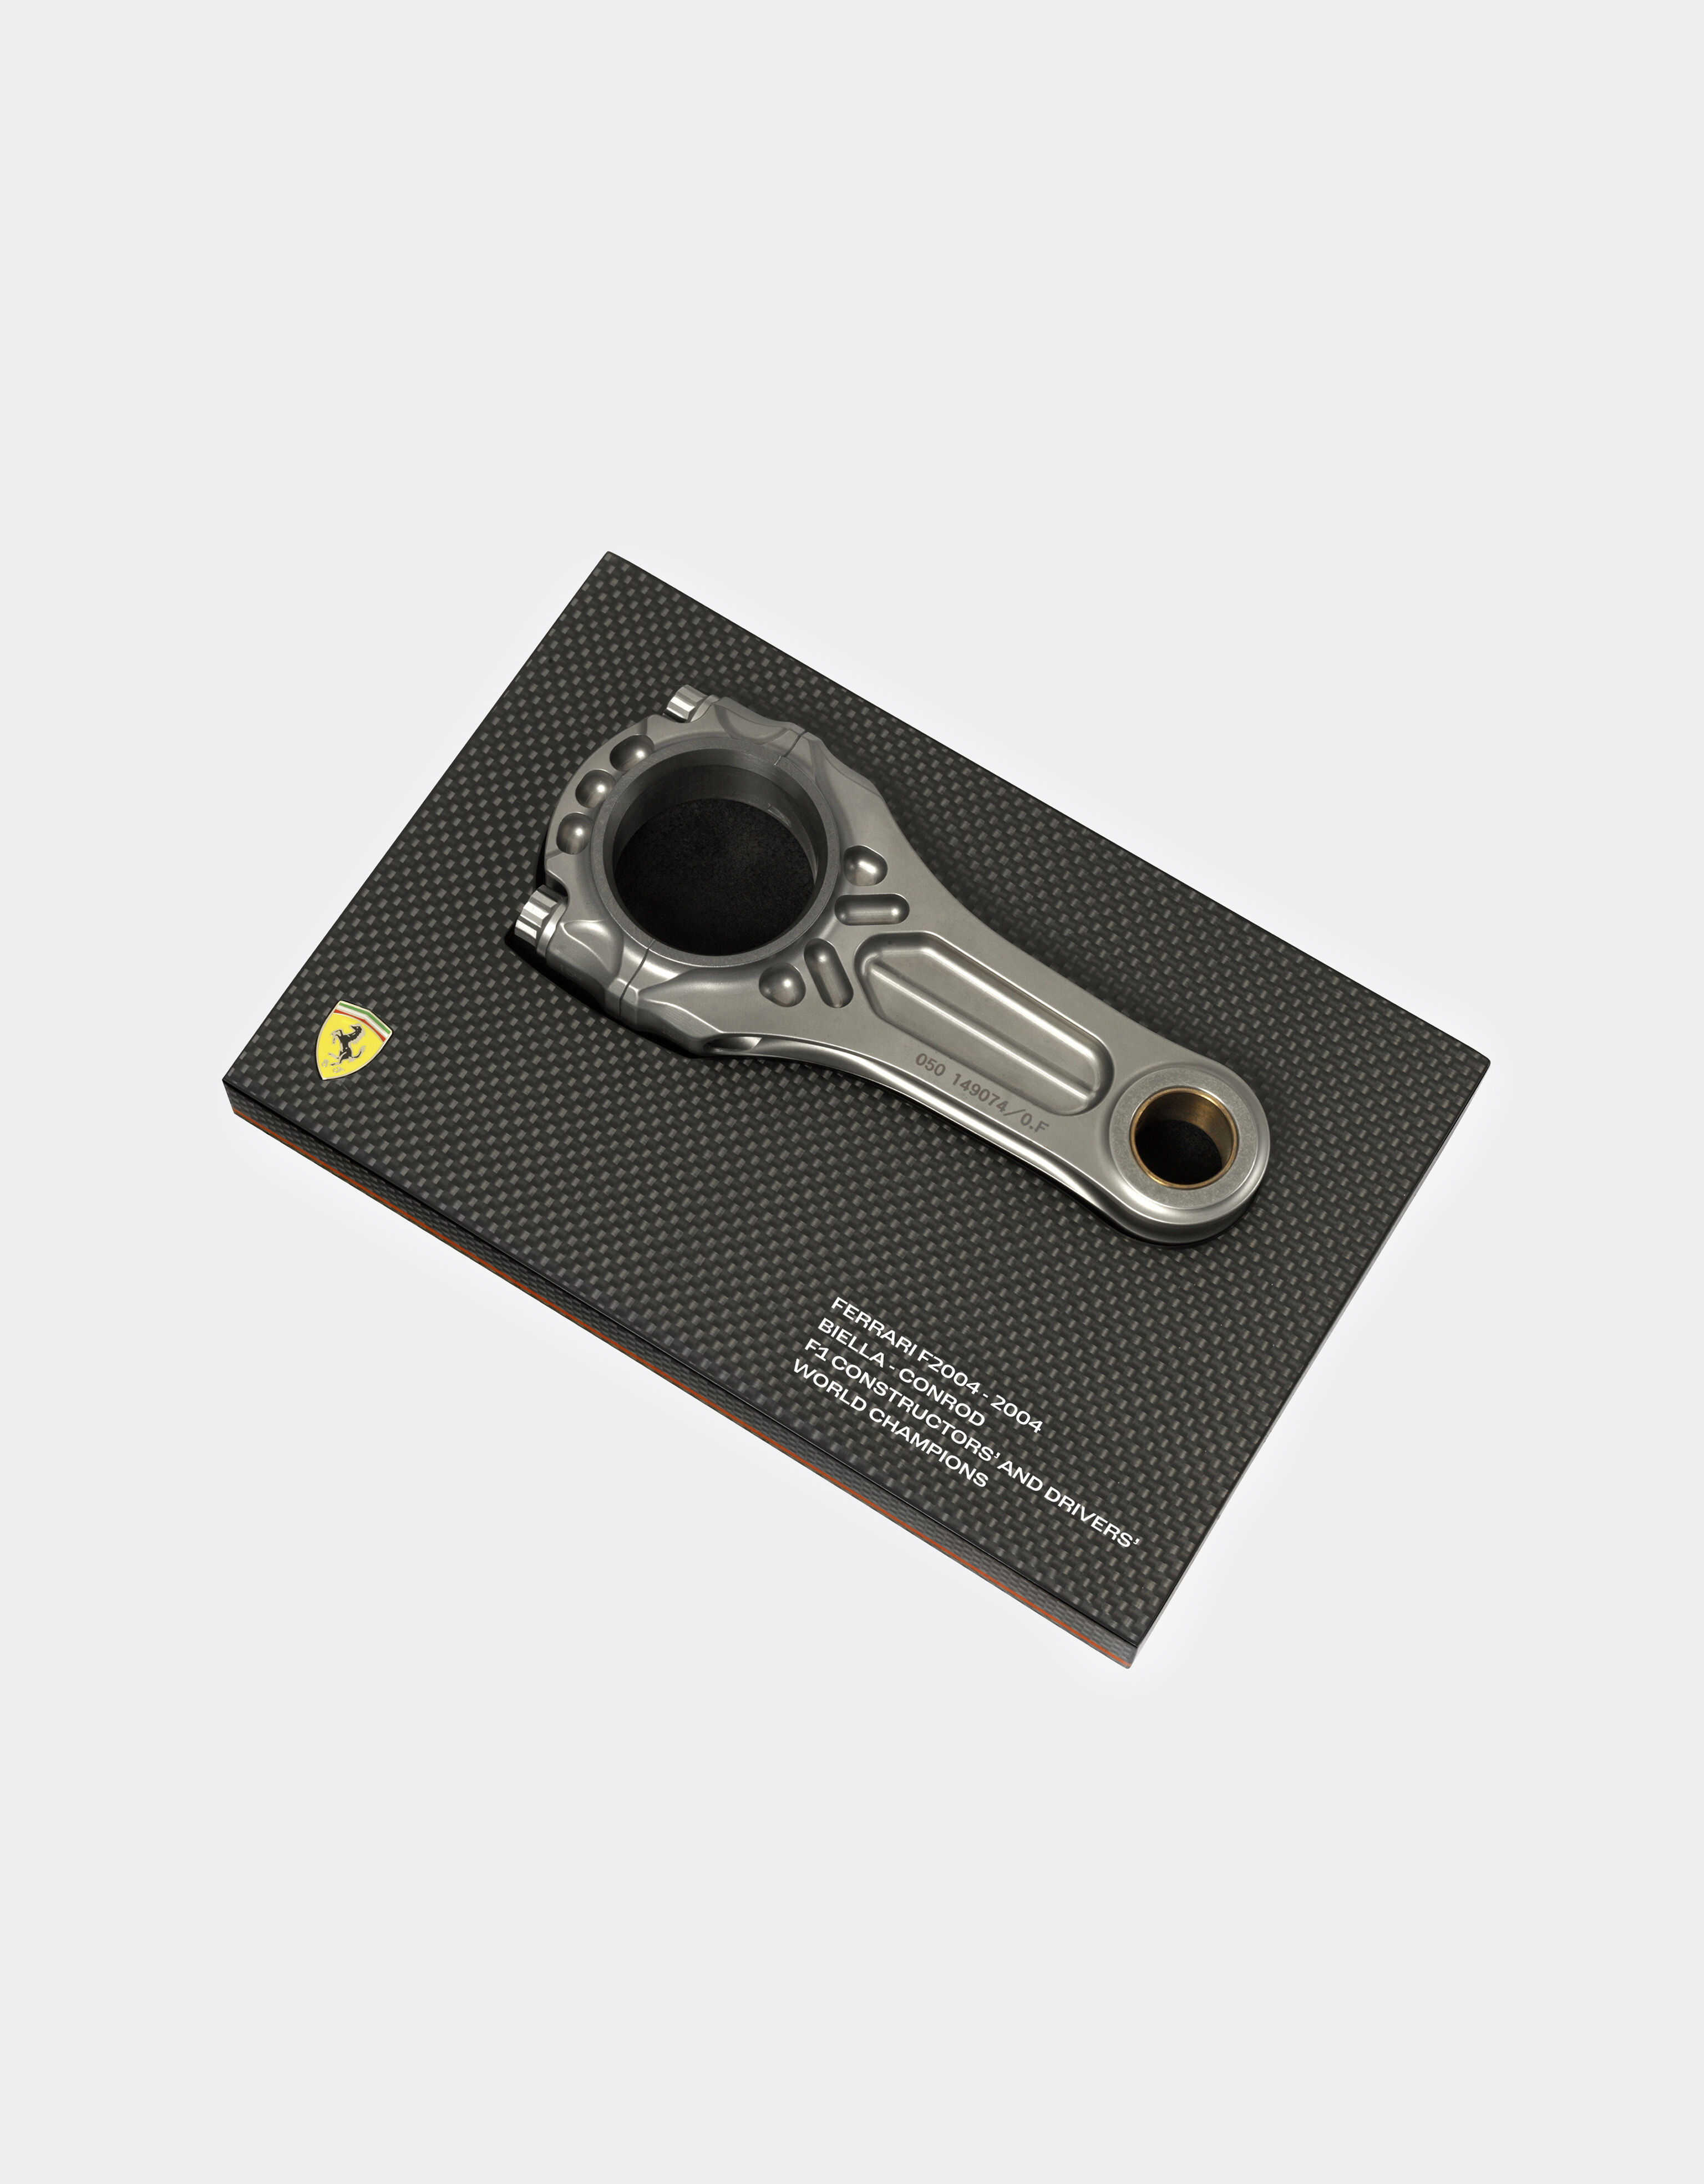 Ferrari Original connecting rod from the F2004, winner of the 2004 Constructors' and Drivers' Championships MULTICOLOUR F1069f